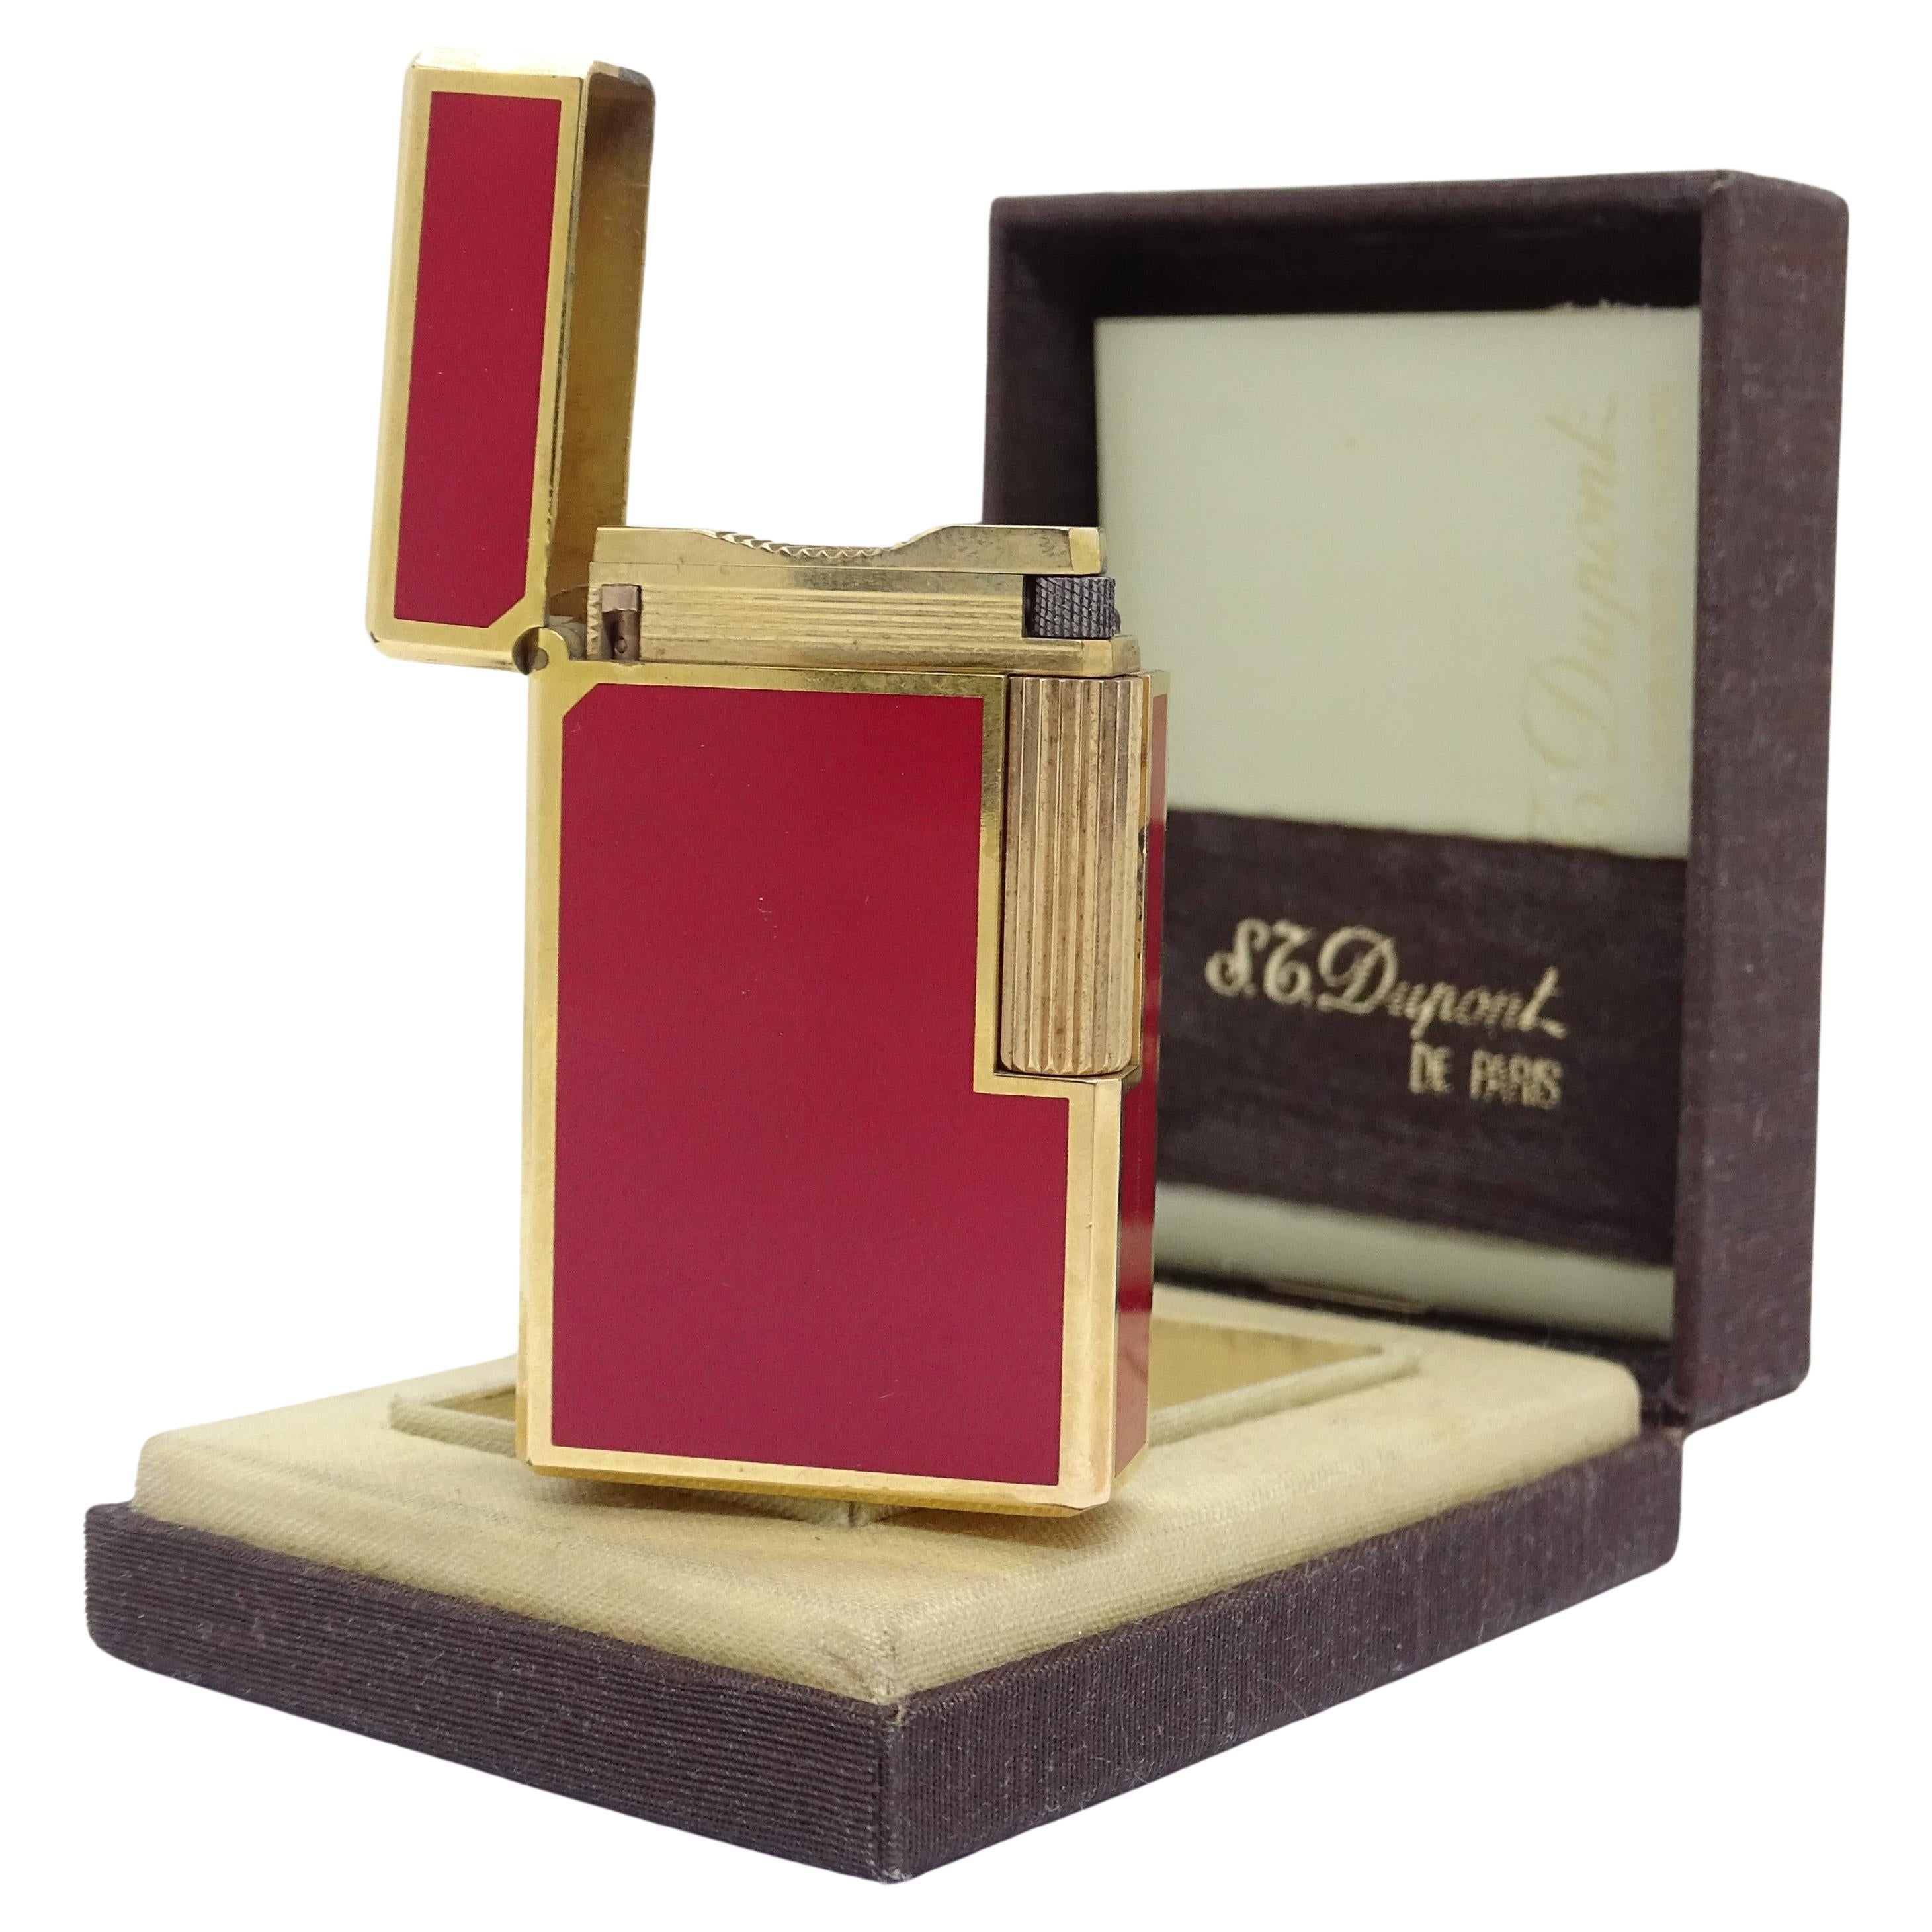 Are Dupont lighters gold?